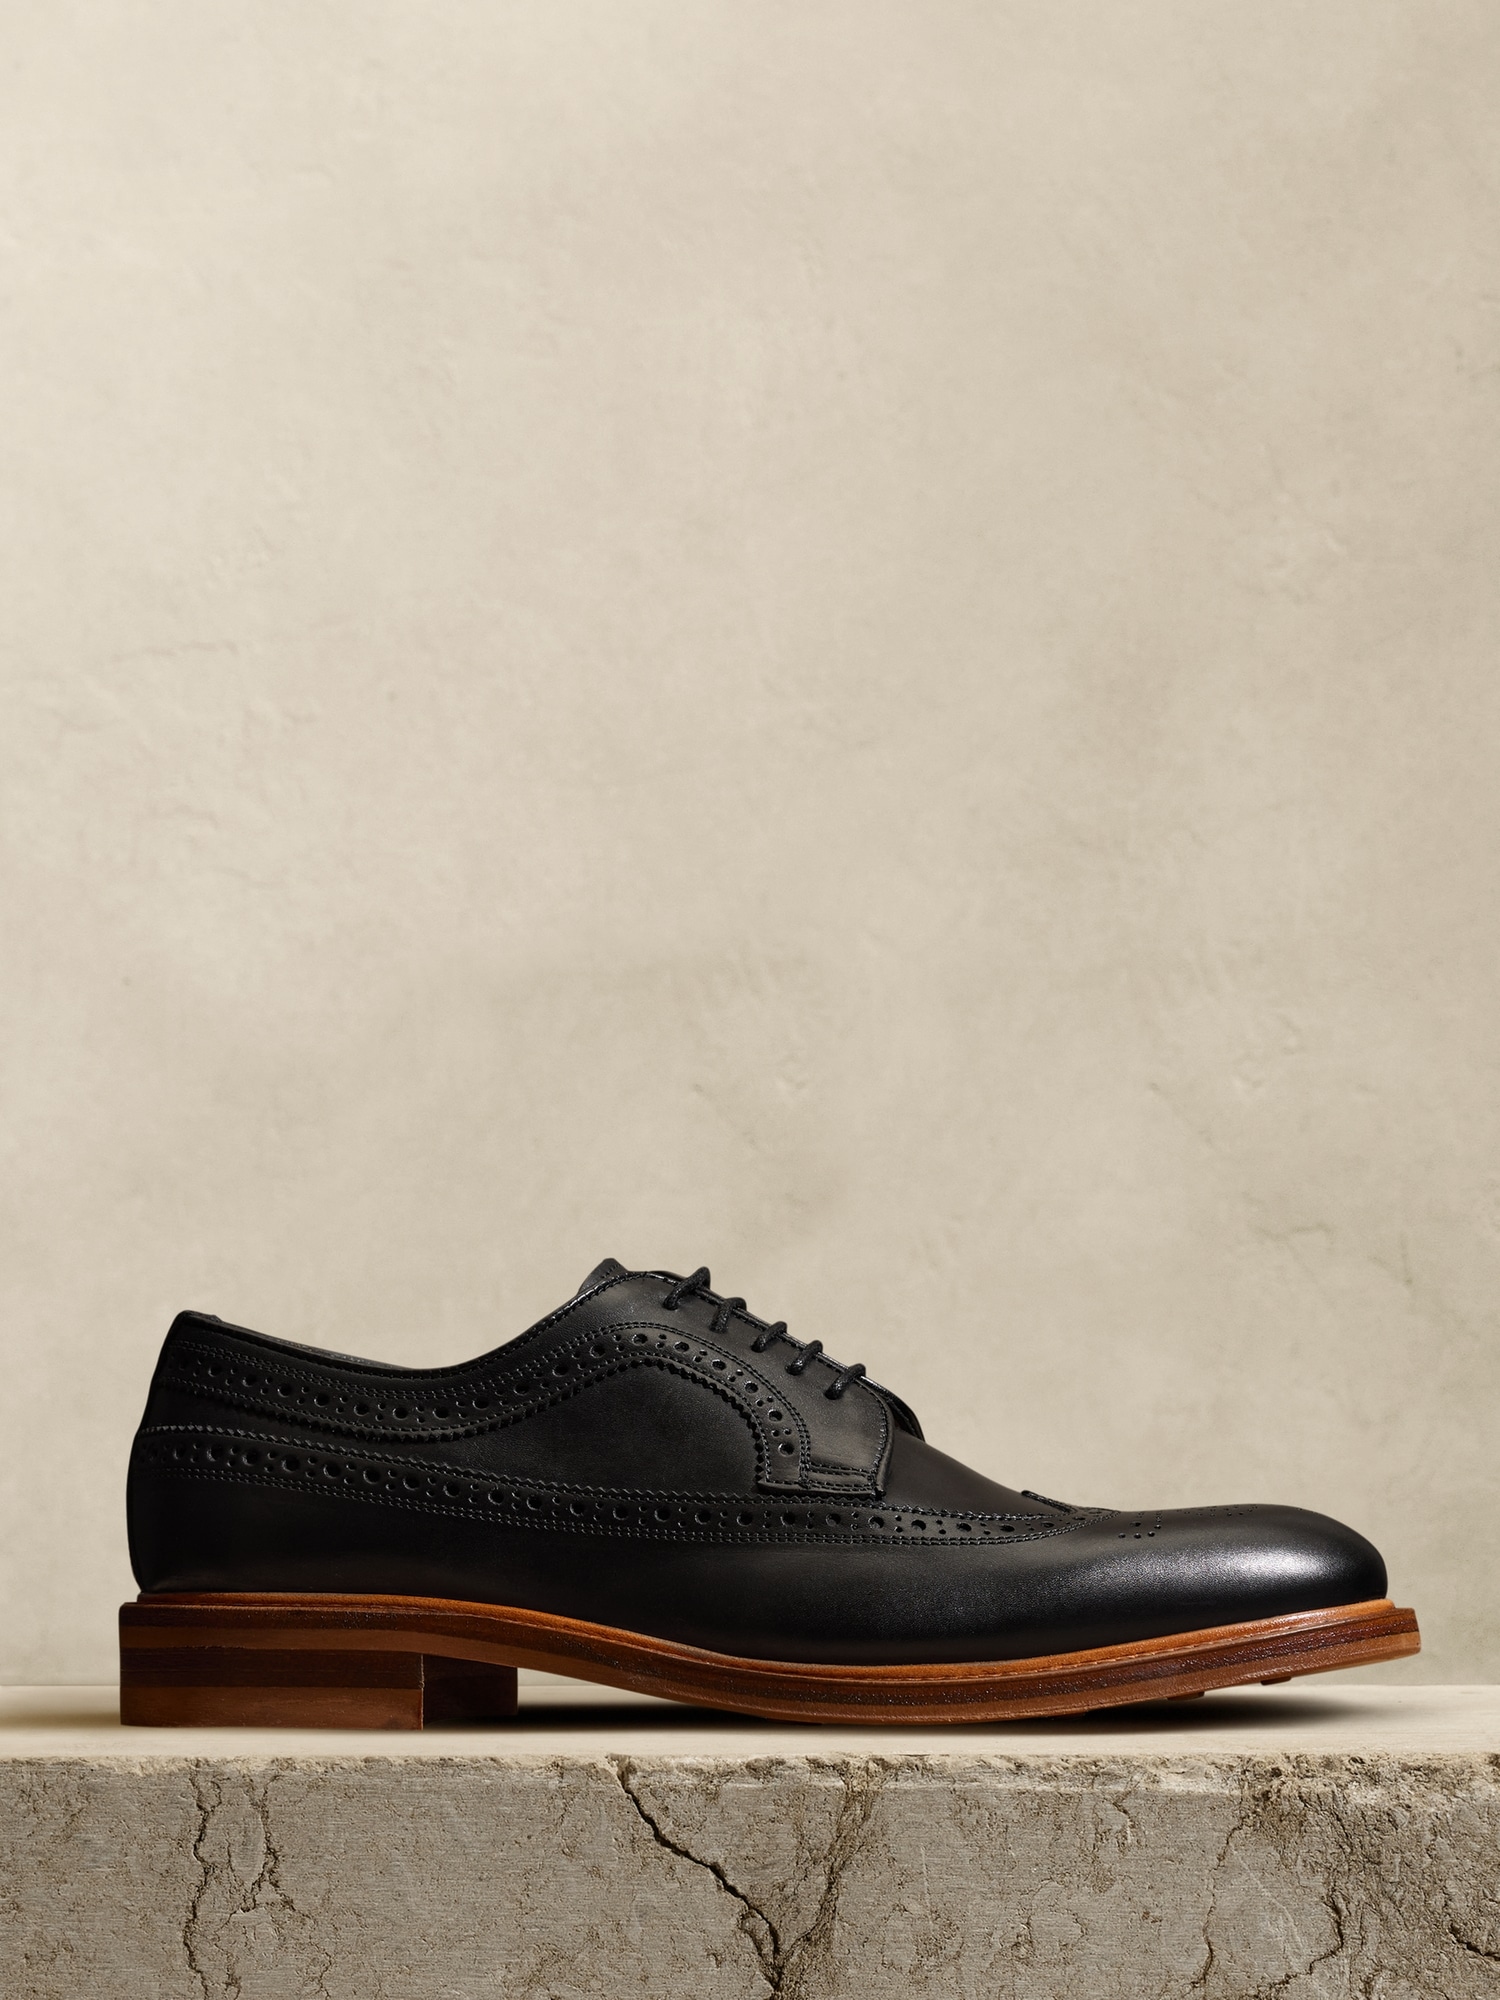 Tan Leather Formal Shoes with Wingtip Punching Brogue Oxford Lace-Up C-calidas.vn